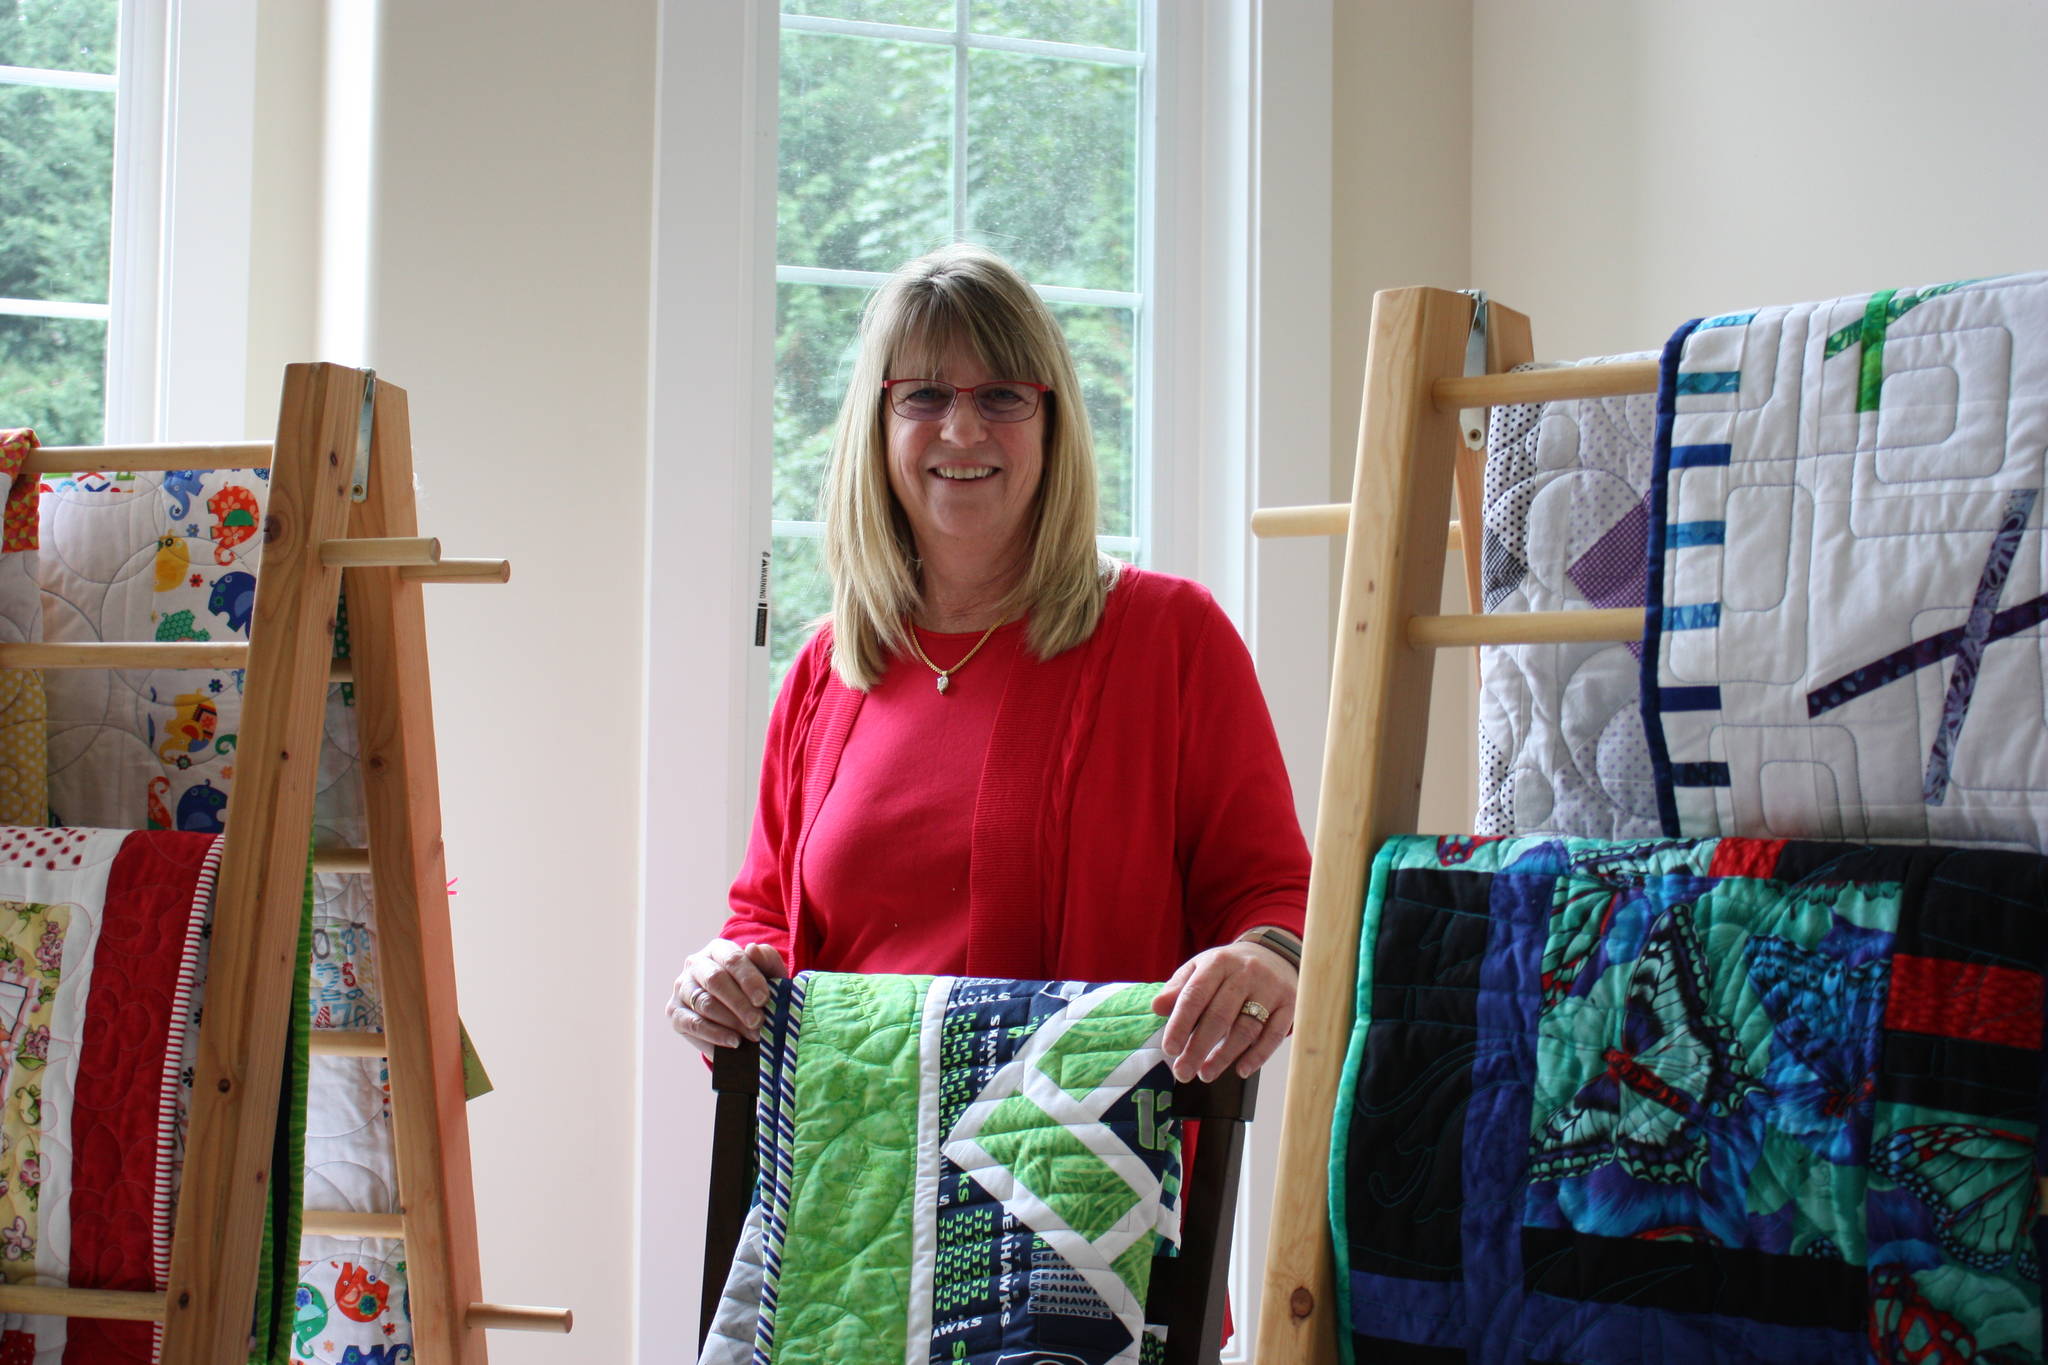 Stephanie Howarth showcases some of her creations at her home. She runs the quilting Etsy Sew Steph Studios. Aaron Kunkler/ Redmond Reporter